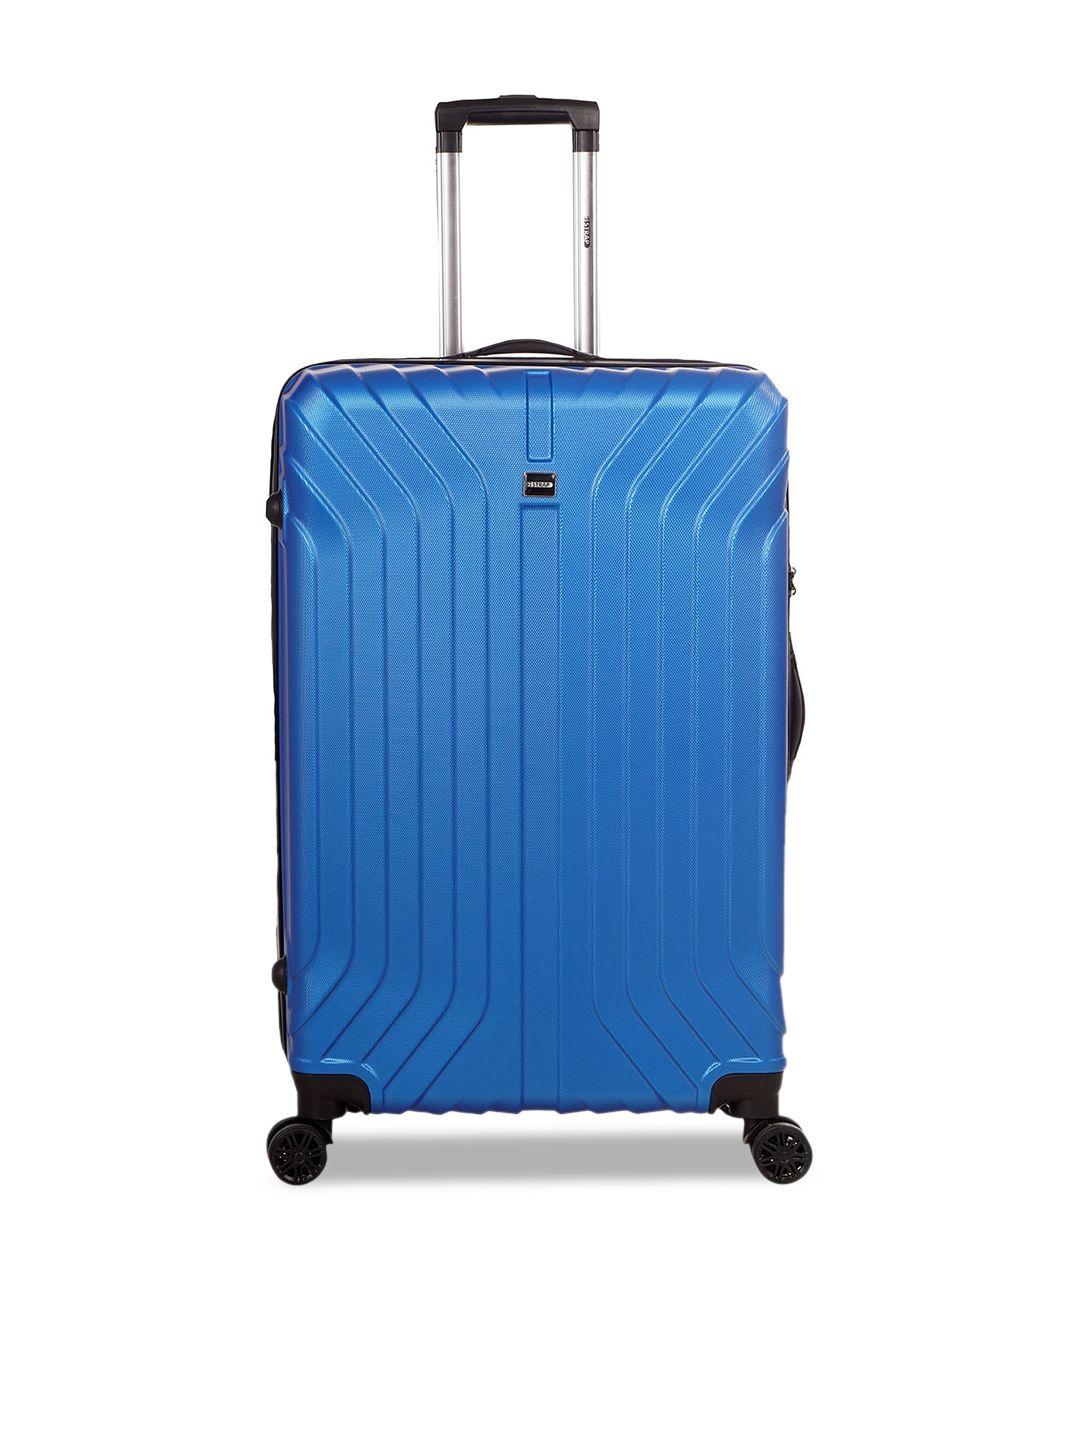 2 strap blue textured large hard trolley suitcase